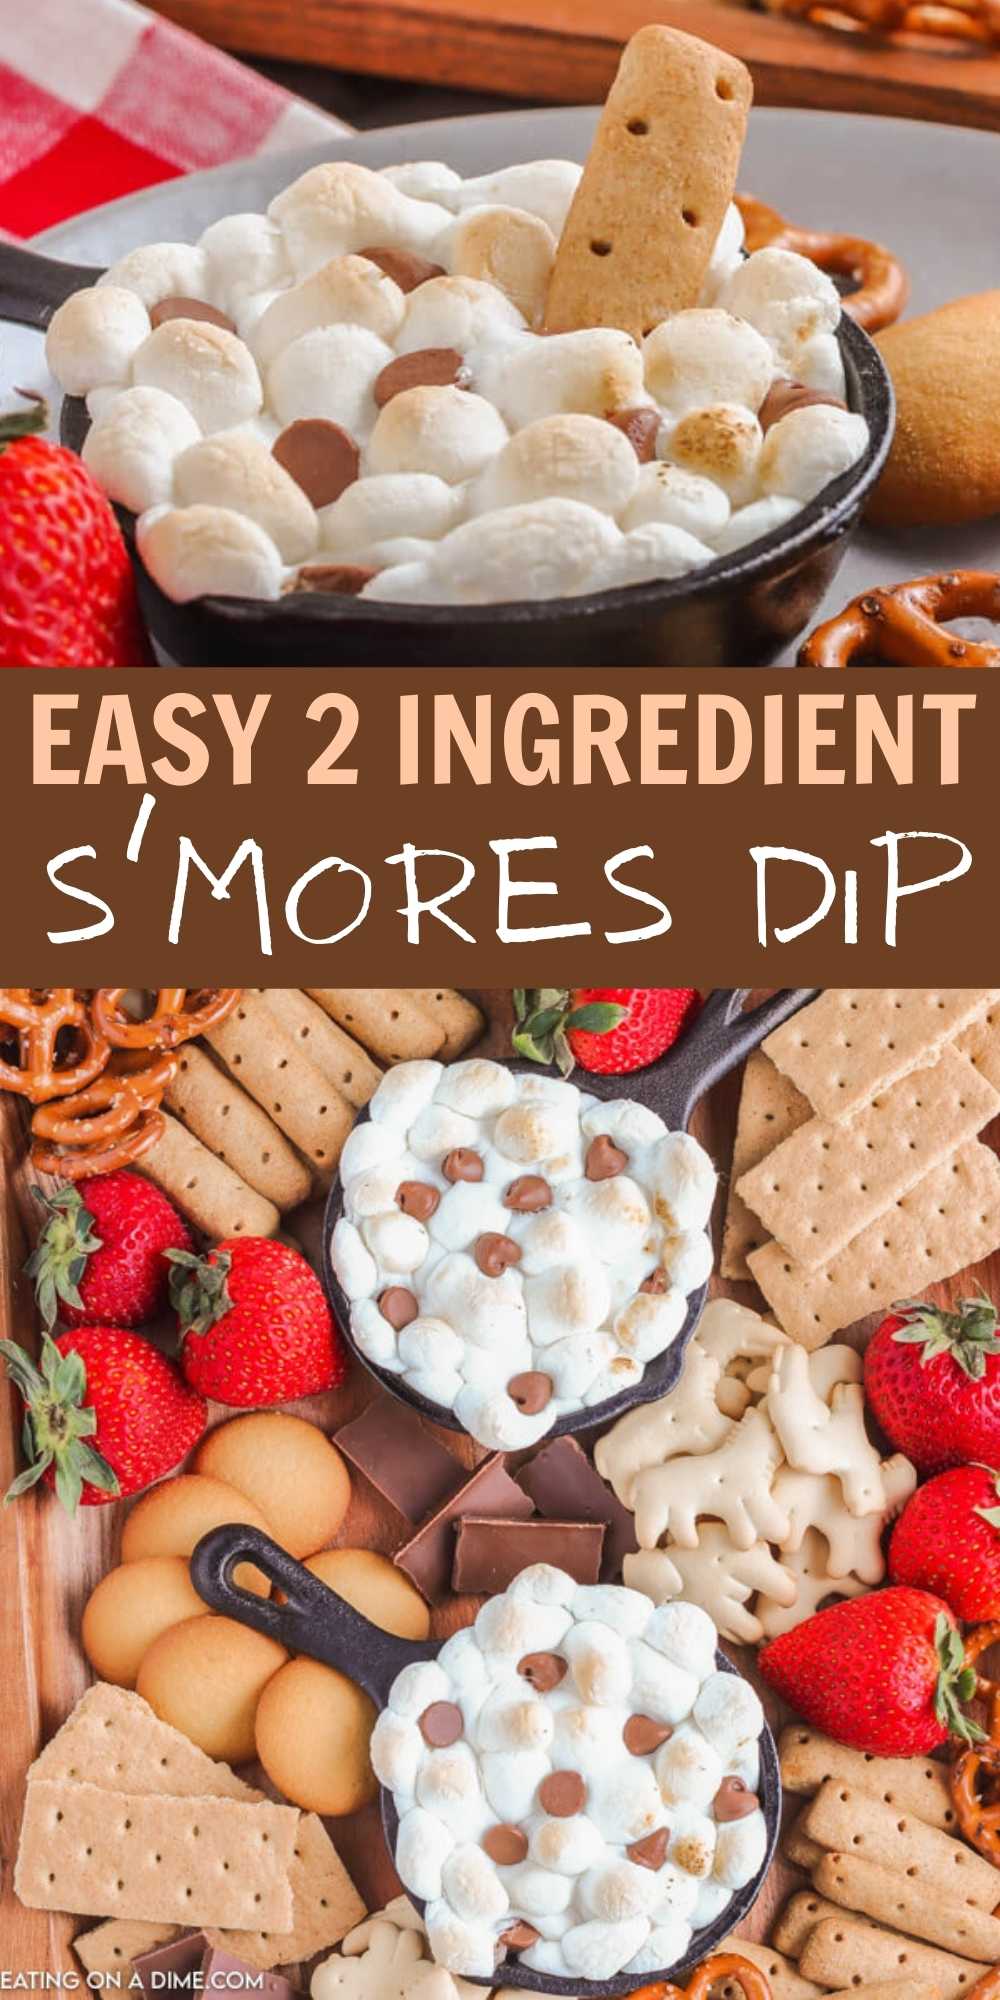 This easy s’mores dip is the perfect treat that is made with only 2 ingredients.  If you love s’mores then I know that everyone is going to love this delicious dessert dip recipe that can be made in just minutes.  #eatingonadime #dessertrecipes #smoresrecipes #dessertdiprecipes 
